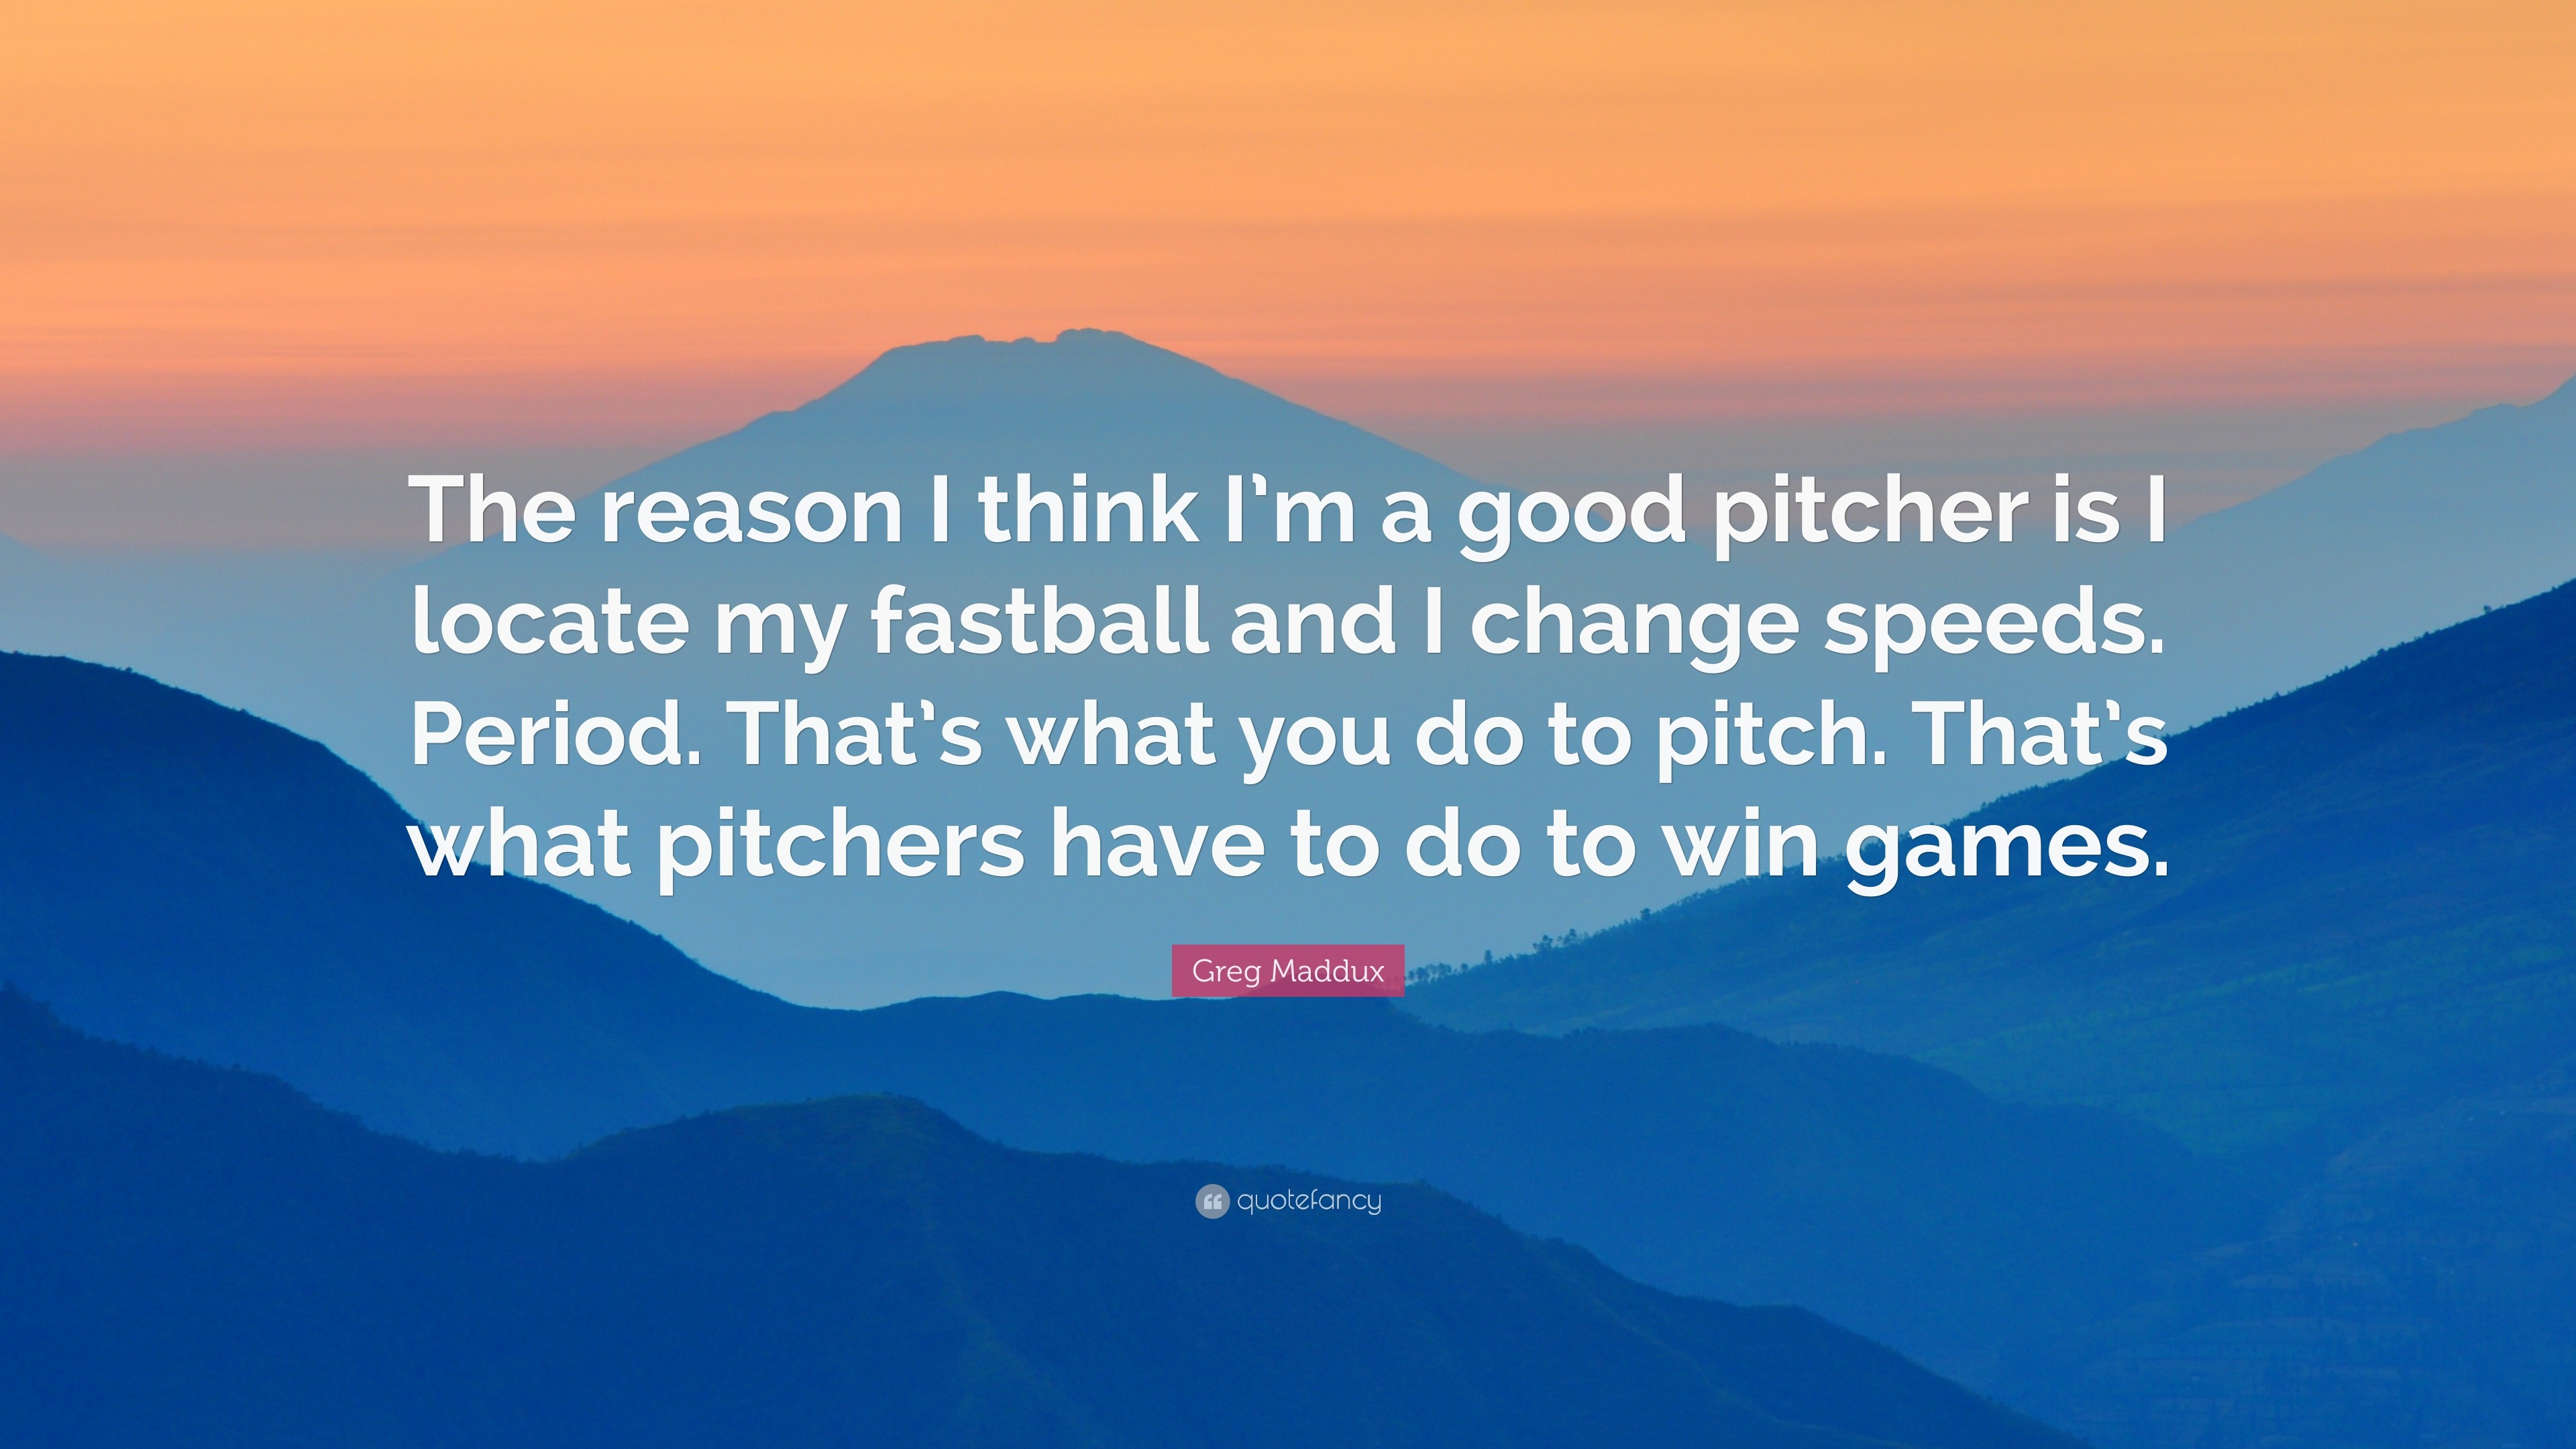 Greg Maddux Quote: “The reason I think I'm a good pitcher is I locate my  fastball and I change speeds. Period. That's what you do to pitch. ”